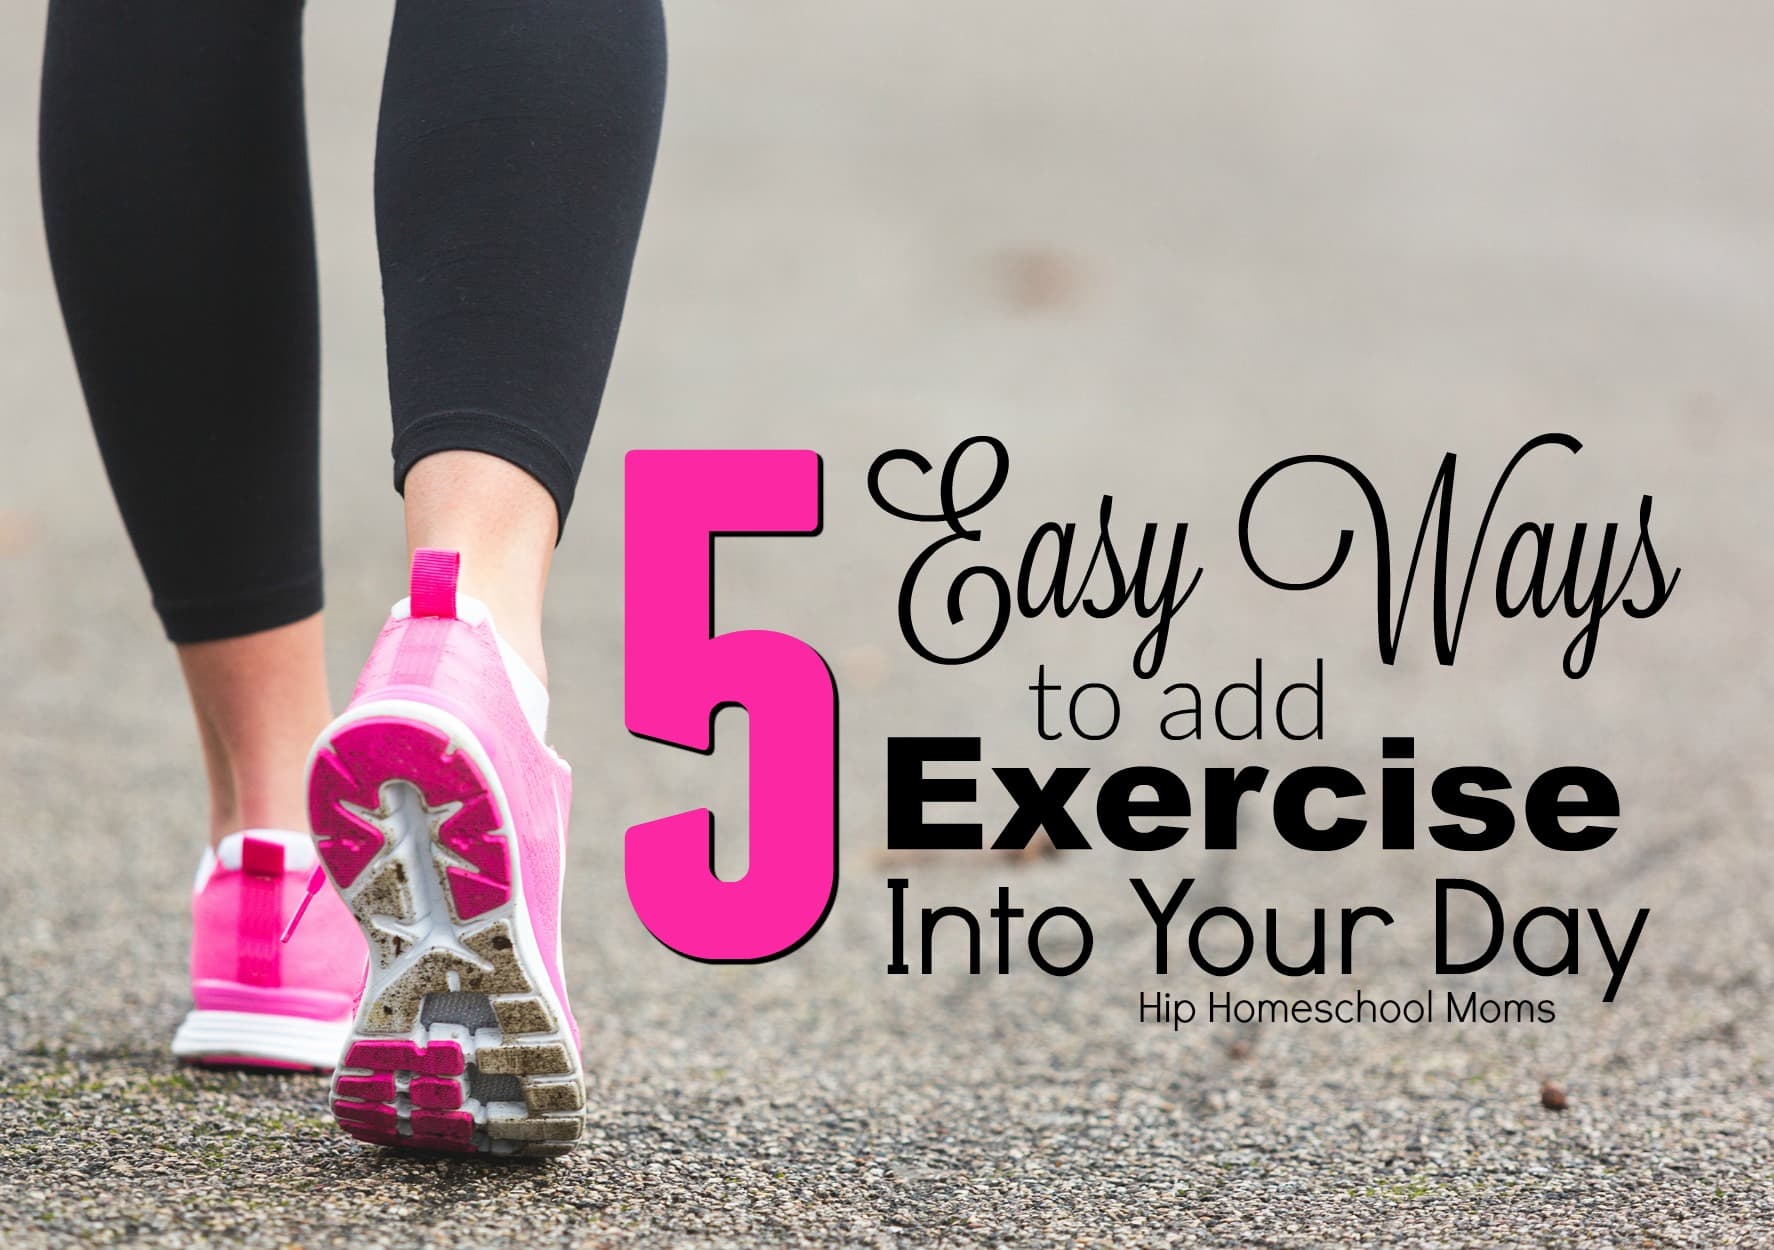 5 Easy Ways to Add Exercise Into Your Day